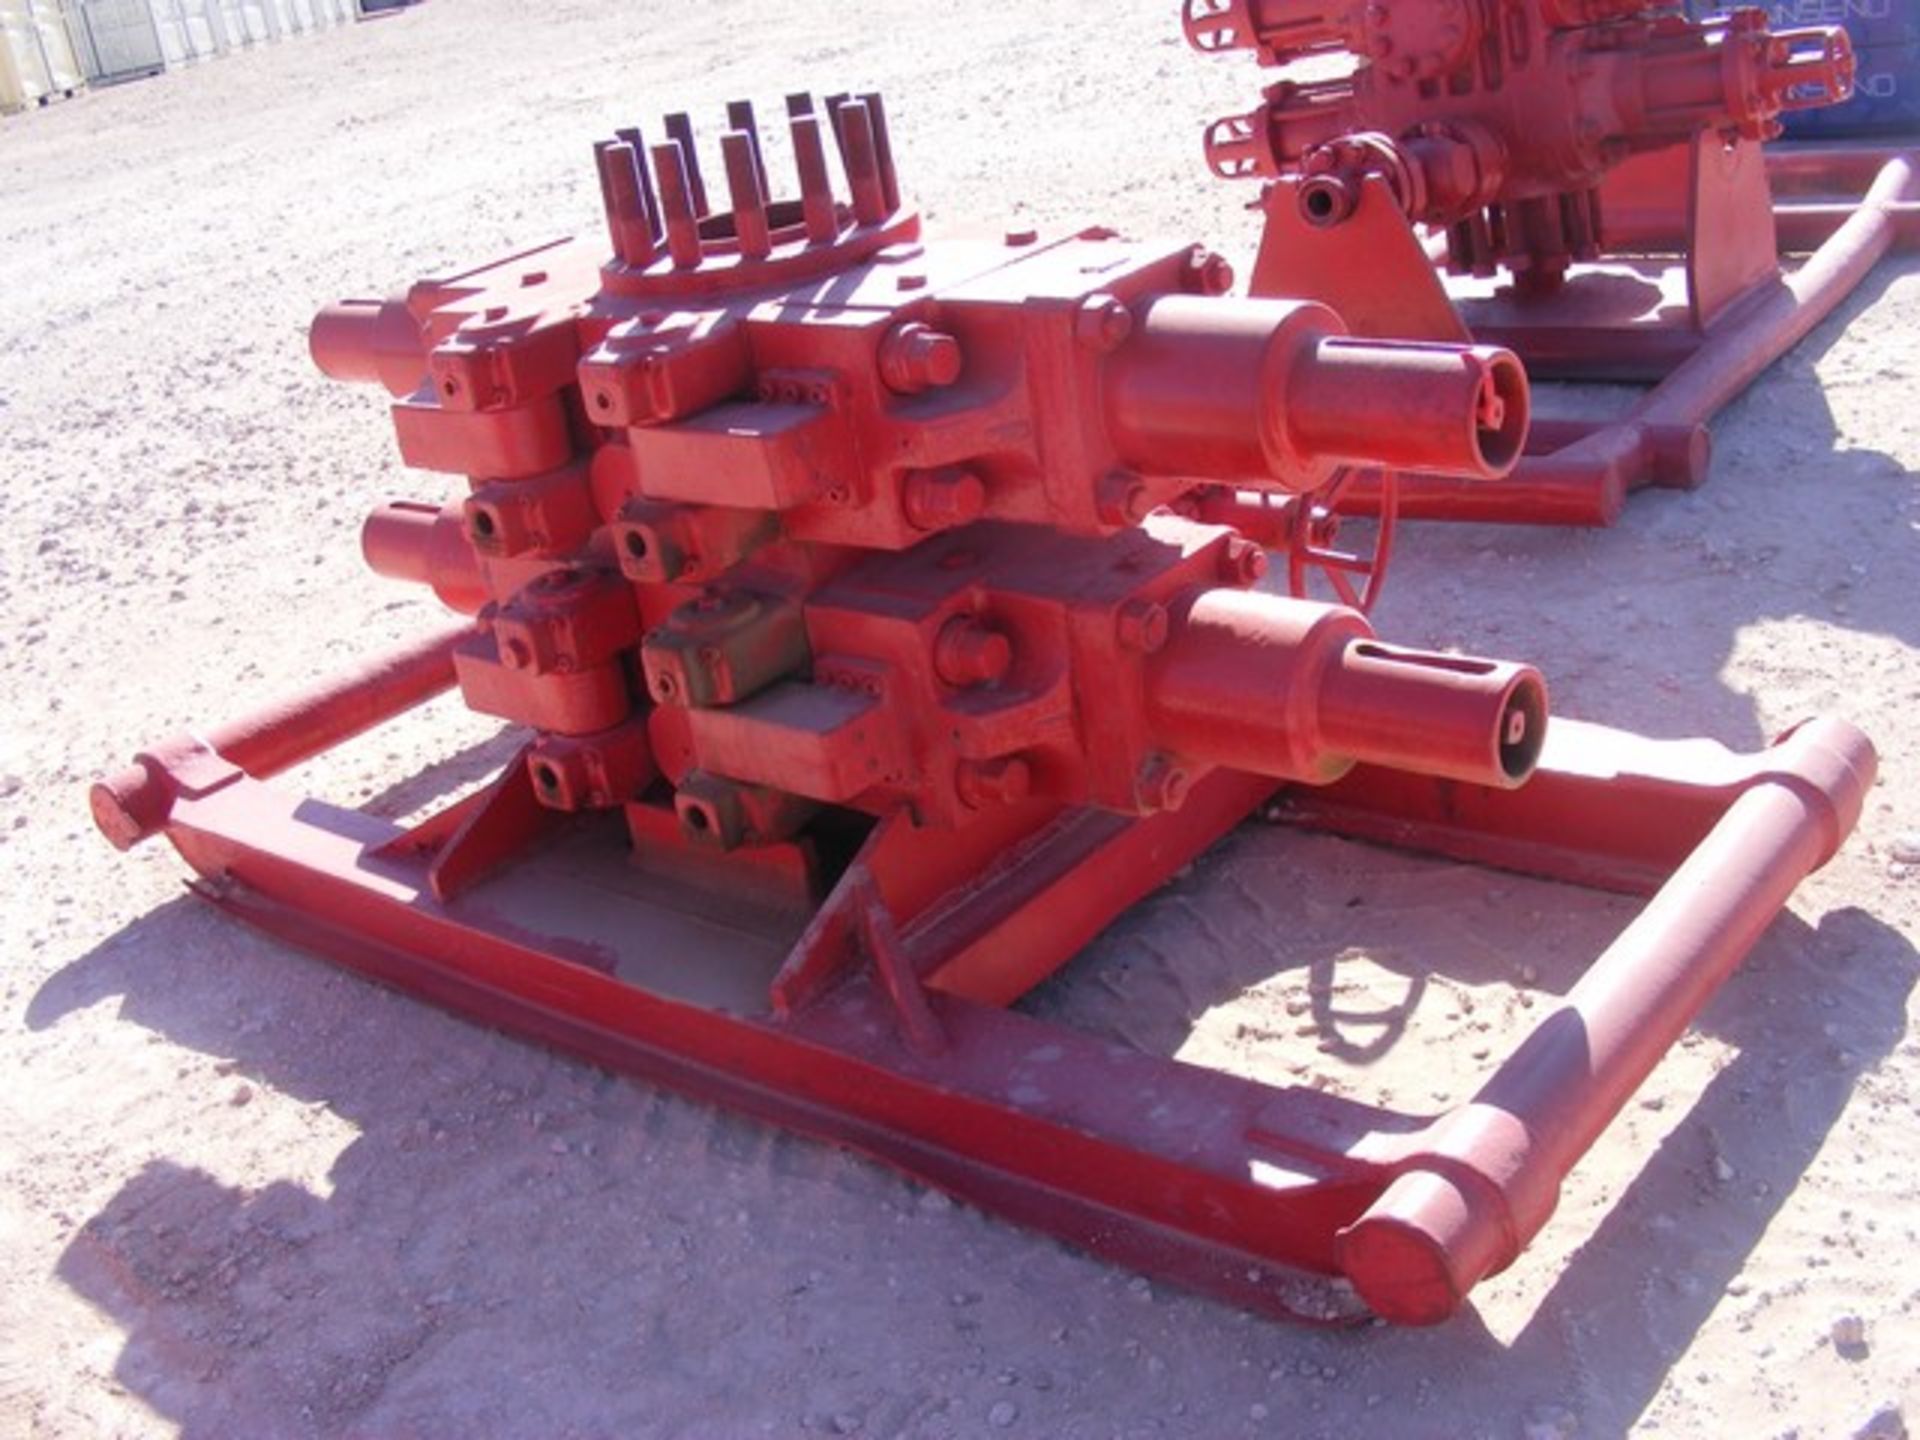 Located in YARD 1 - Midland, TX (2918) 7-1/16" 5K# HYDRIL DBL BOP W/ BOP STAND - Image 3 of 4